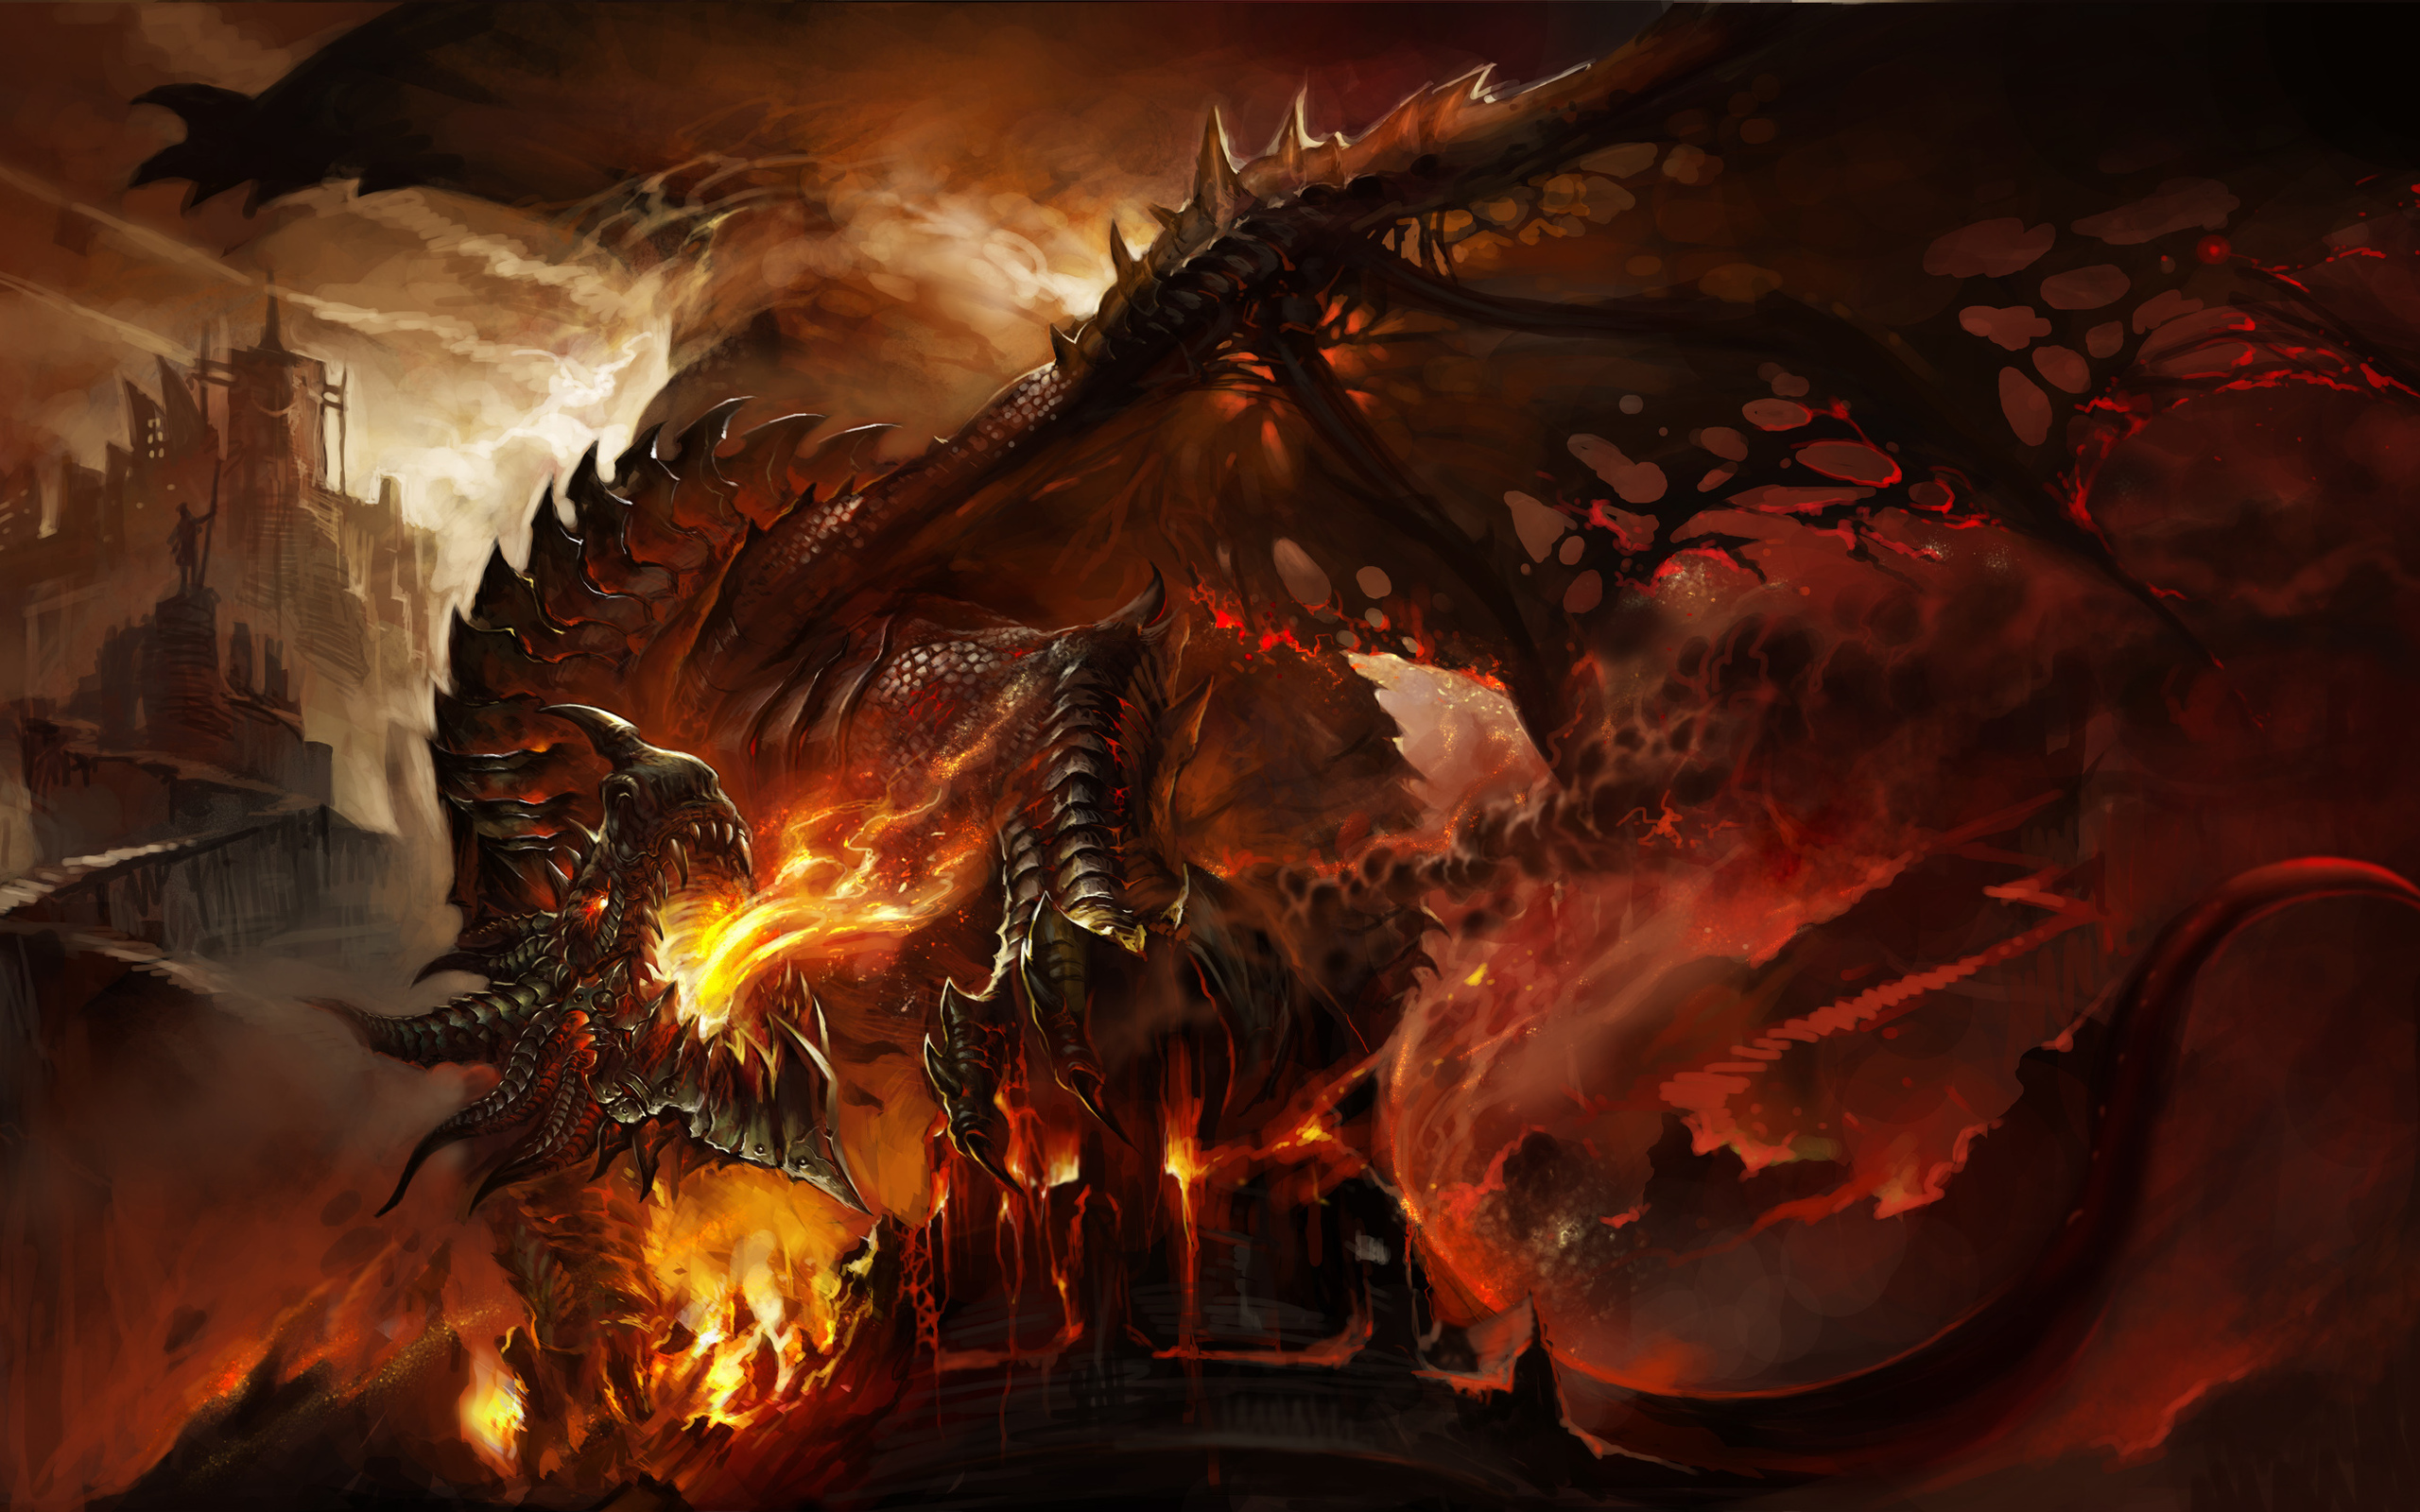 world of warcraft, video game, city, deathwing (world of warcraft), dragon, fantasy, fire, warcraft